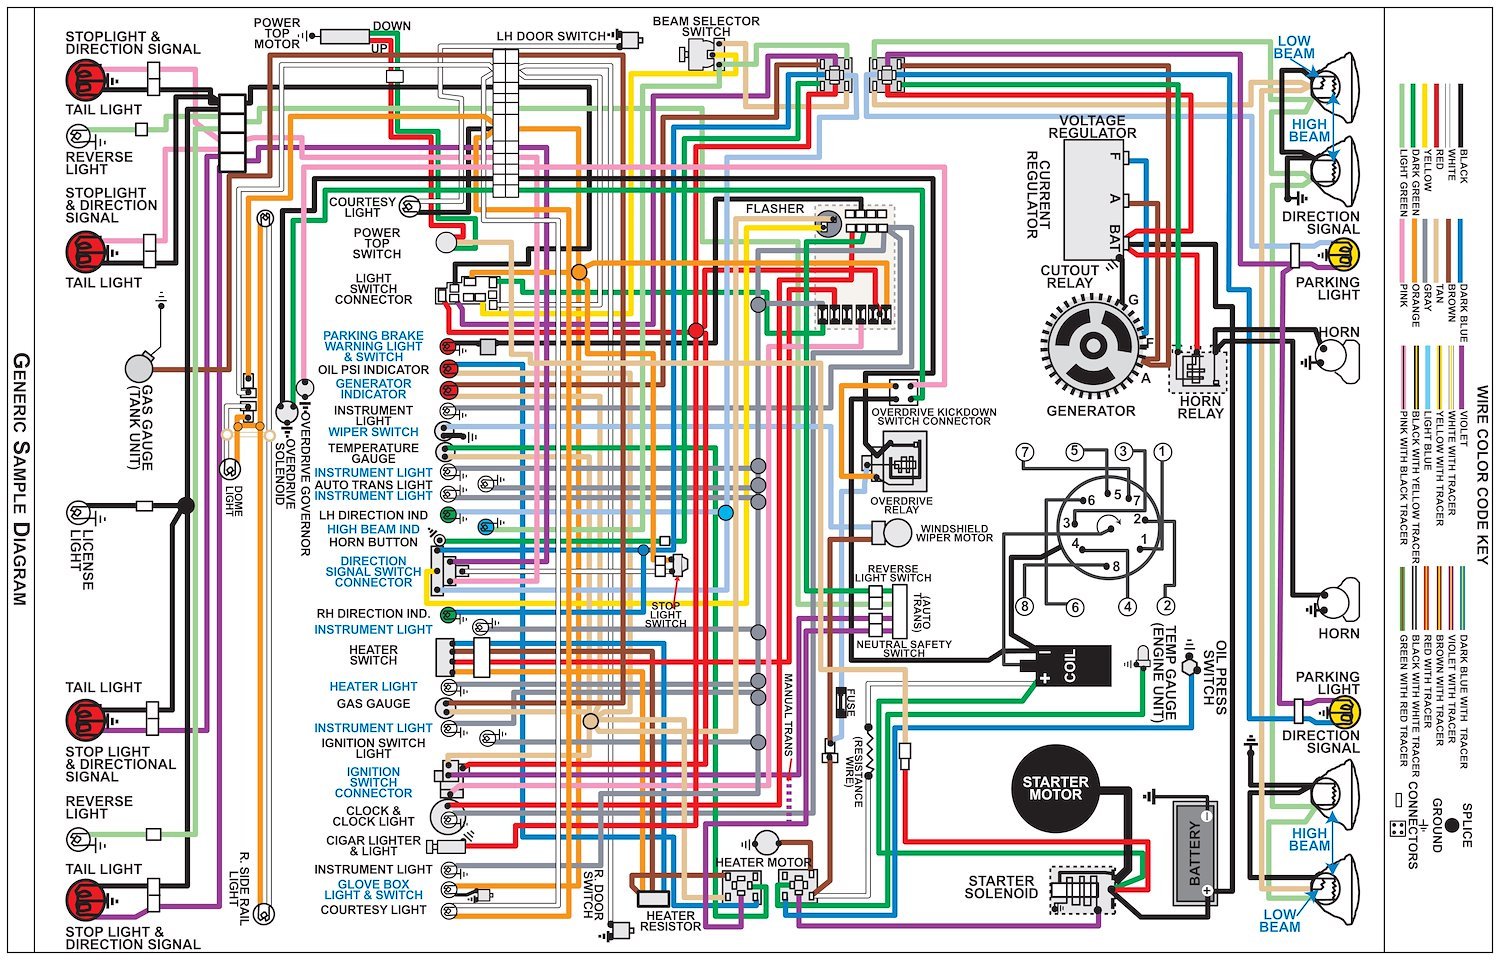 Wiring Diagram for 1971 Dodge Dart with Standard